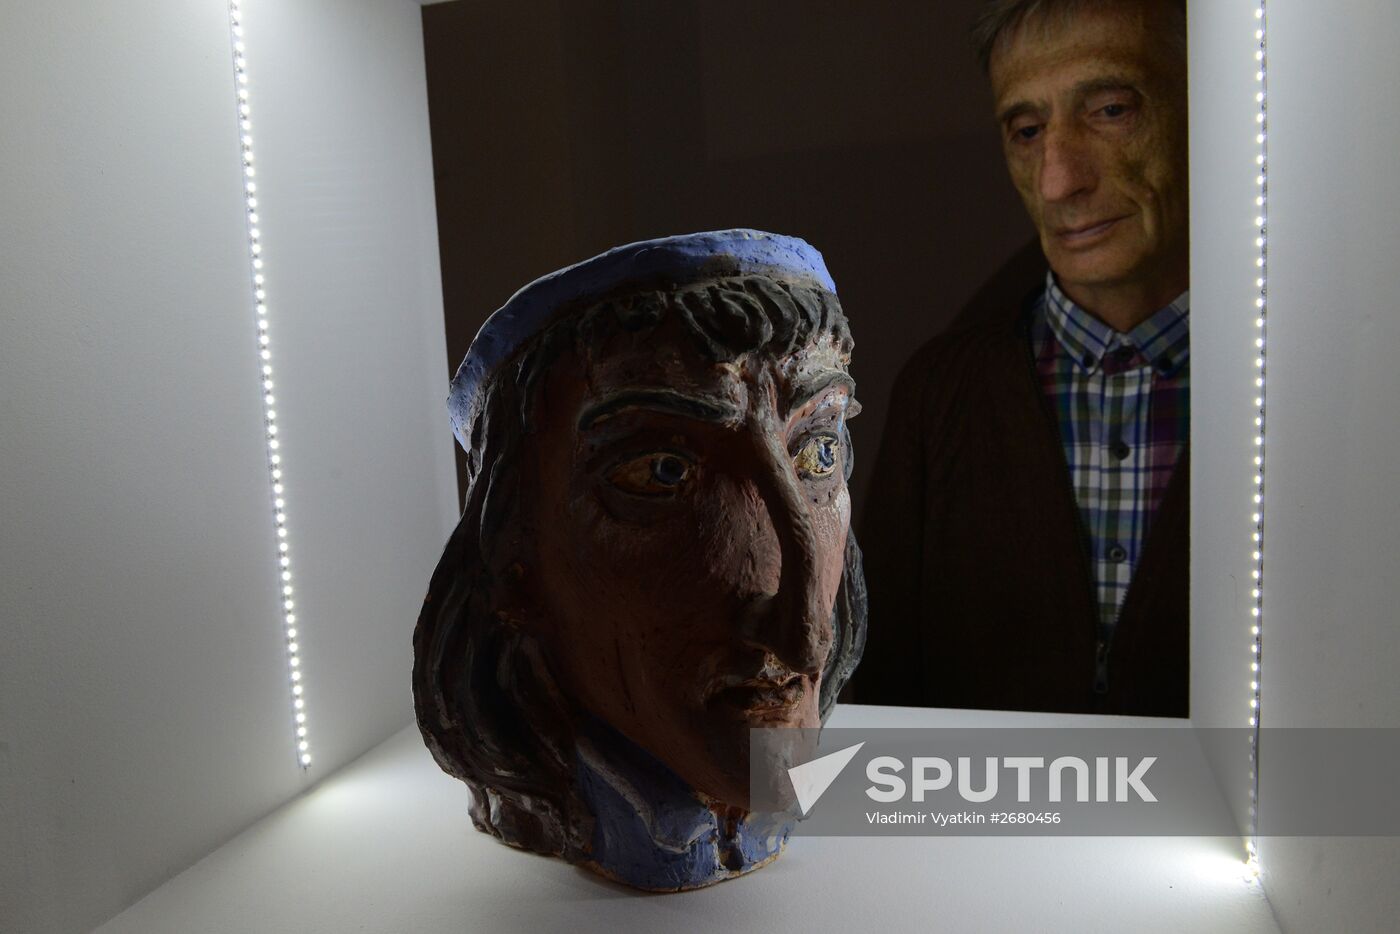 "The Sculptures We Don't See" exhibition